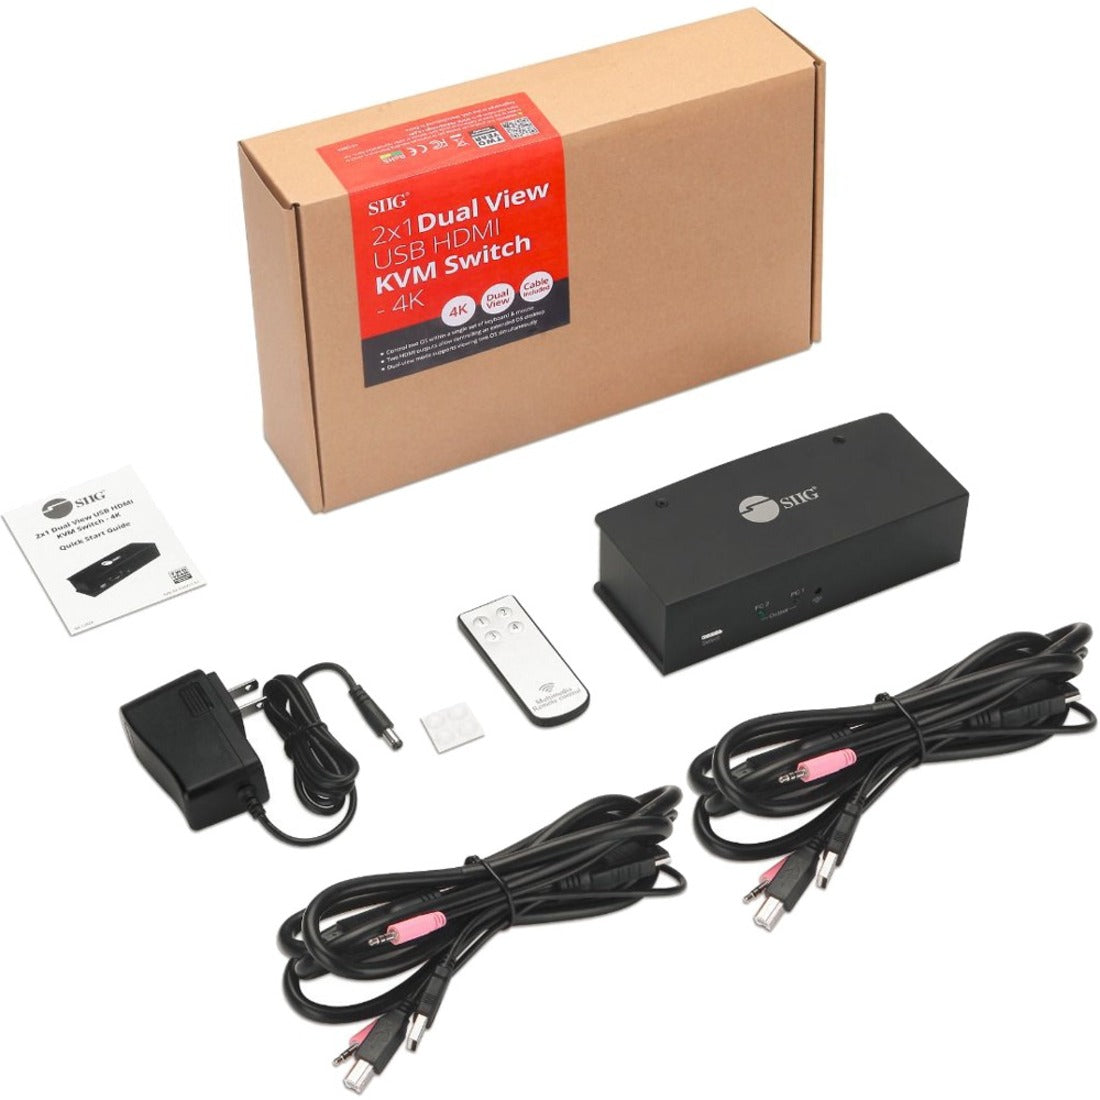 SIIG CE-KV0711-S1 2x1 Dual View USB HDMI KVM Switch - 4K, Dual Display or Extended Display